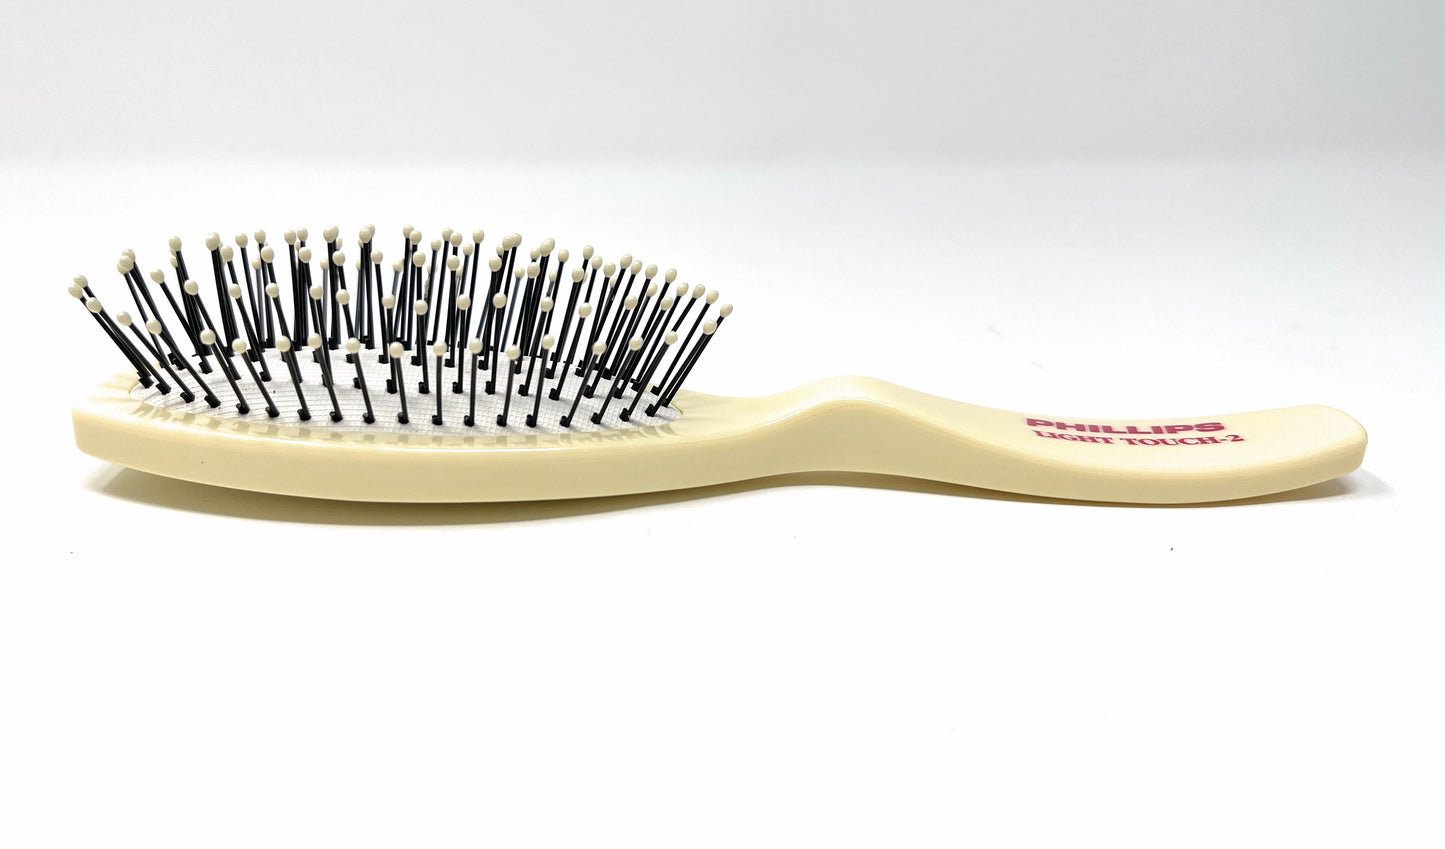 Phillips Brush Light Touch 2 Oval Cushioned Brush Purse Size 7 Rows Bristles Color Ivory